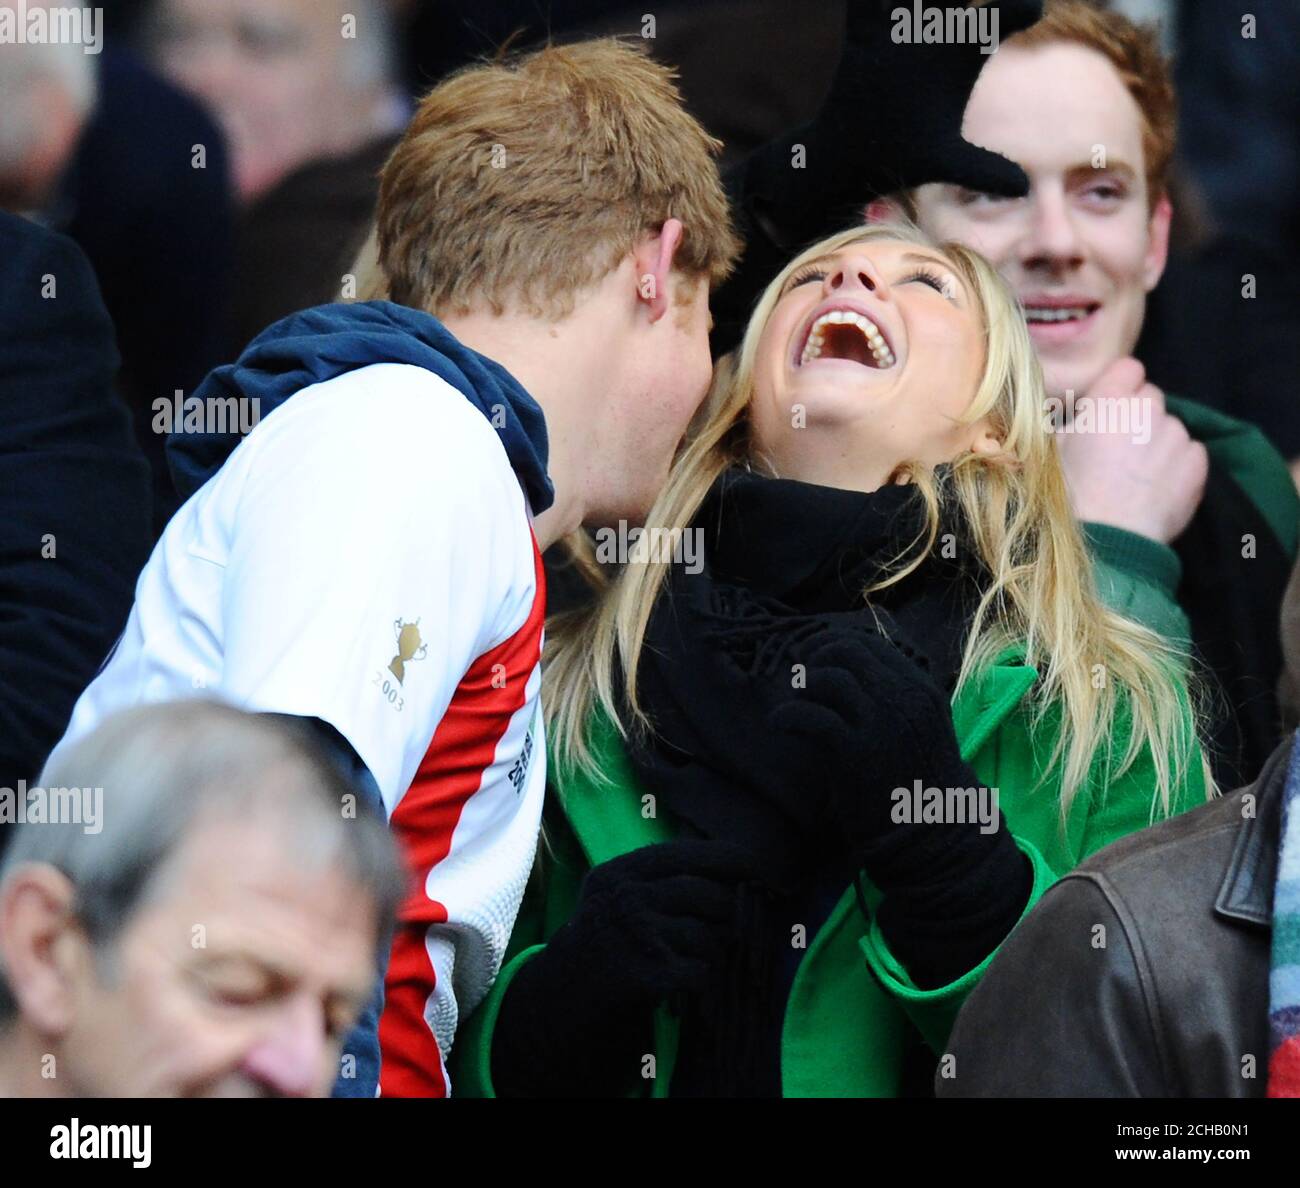 Prince Harry with girlfriend Chelsy Davy England v South Africa rugby Match, Twickenham, London. 22/11/2008 PICTURE CREDIT : © MARK PAIN / ALAMY Stock Photo